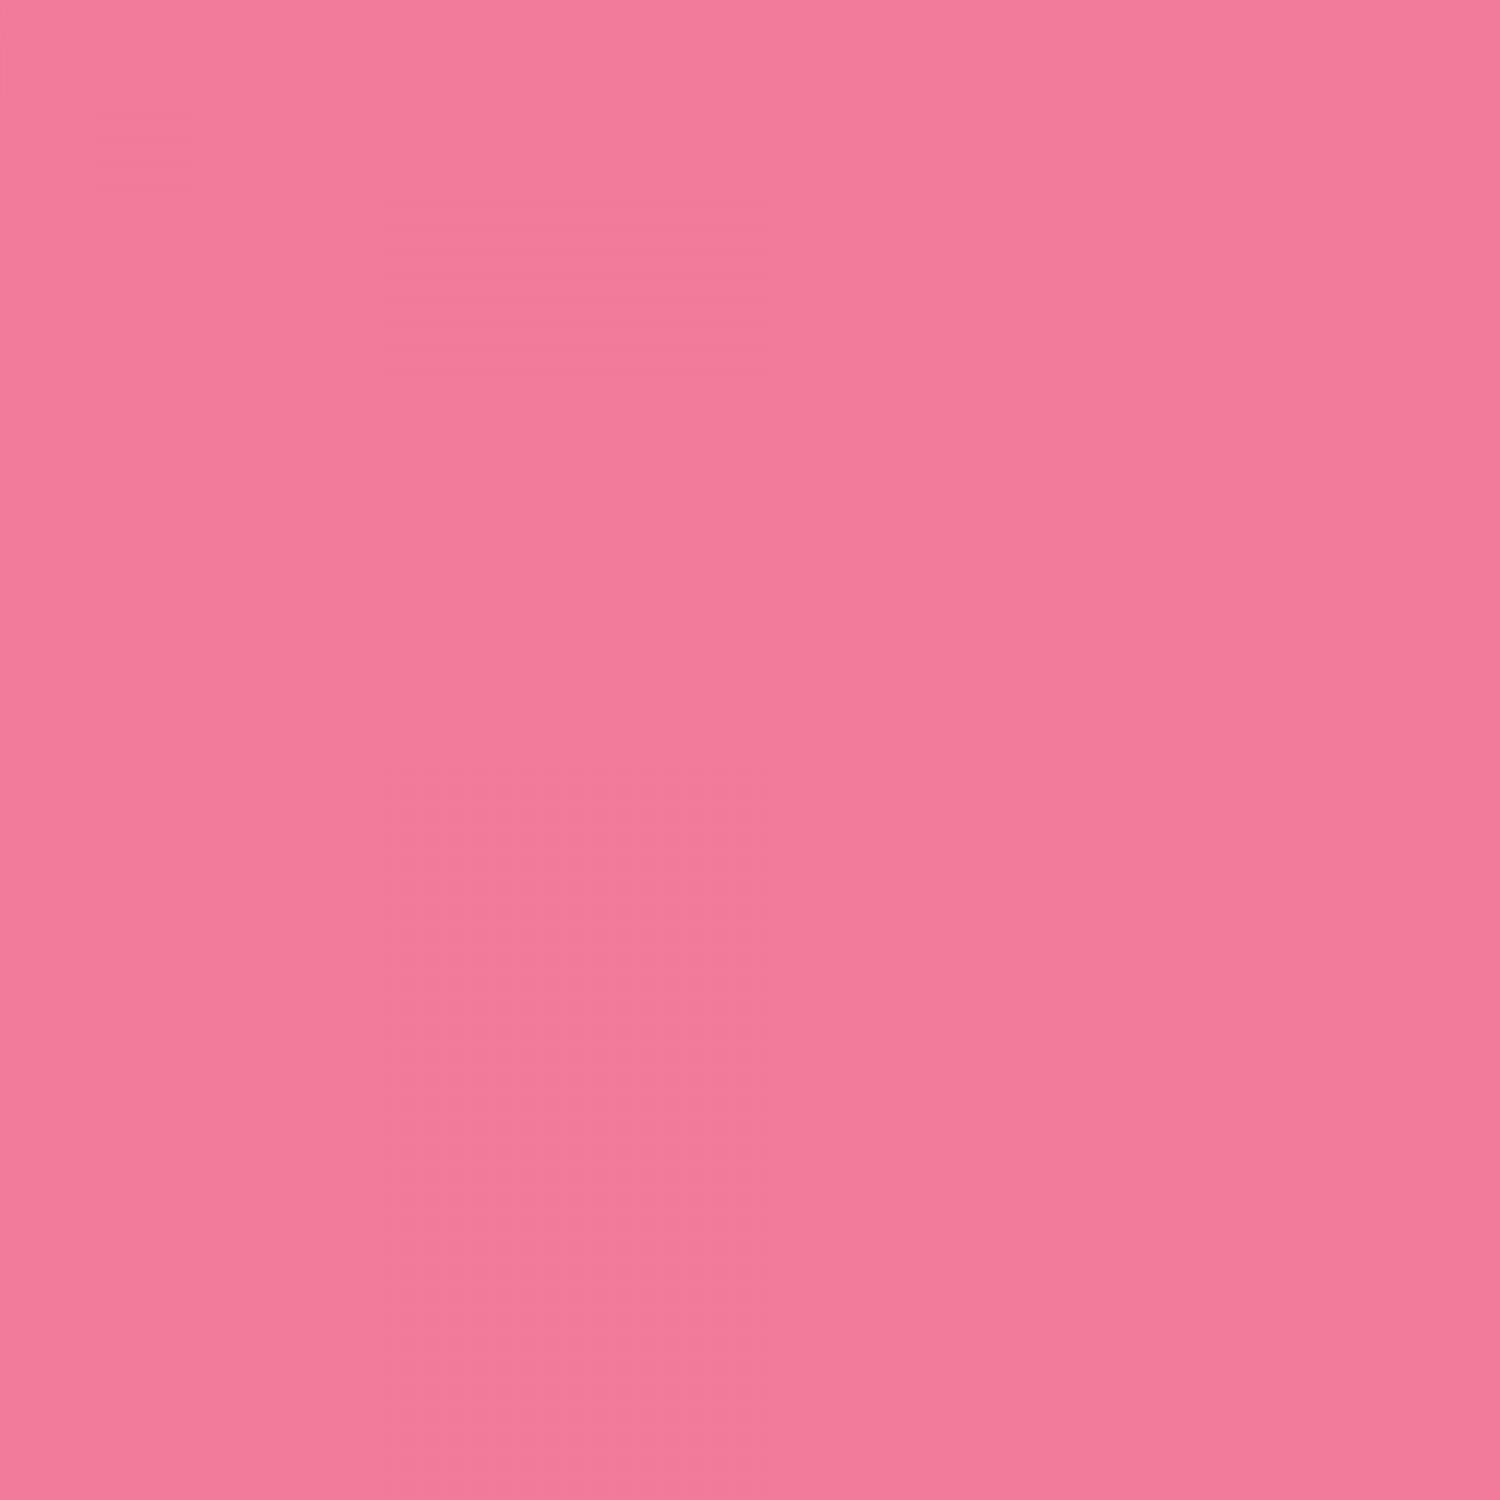 #C120 Solid Hot Pink 100% Cotton - Price Per Yard